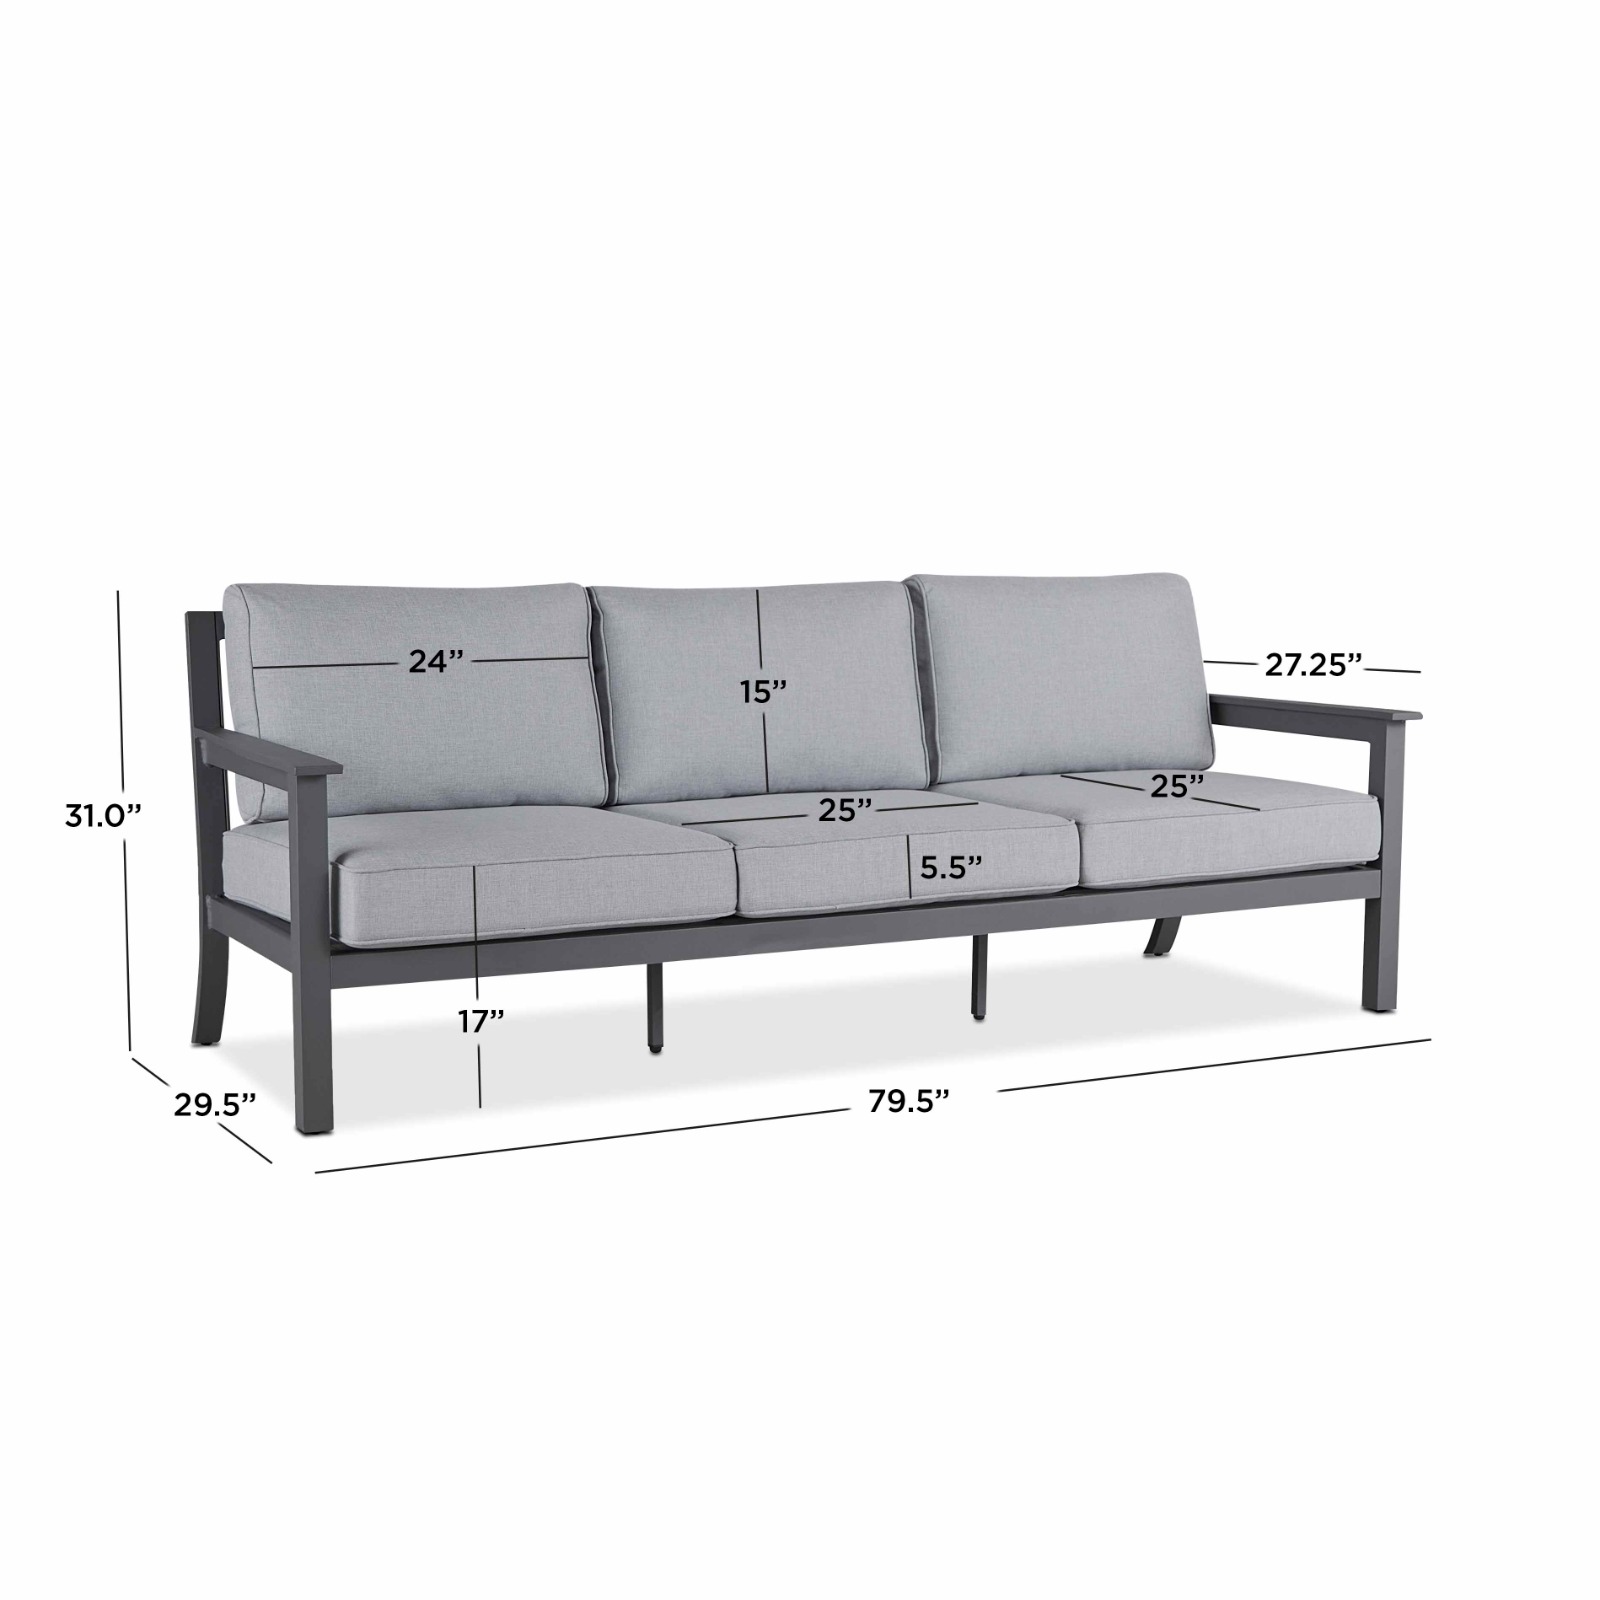 Ortun Outdoor Three Seat Sofa Couch Patio Furniture